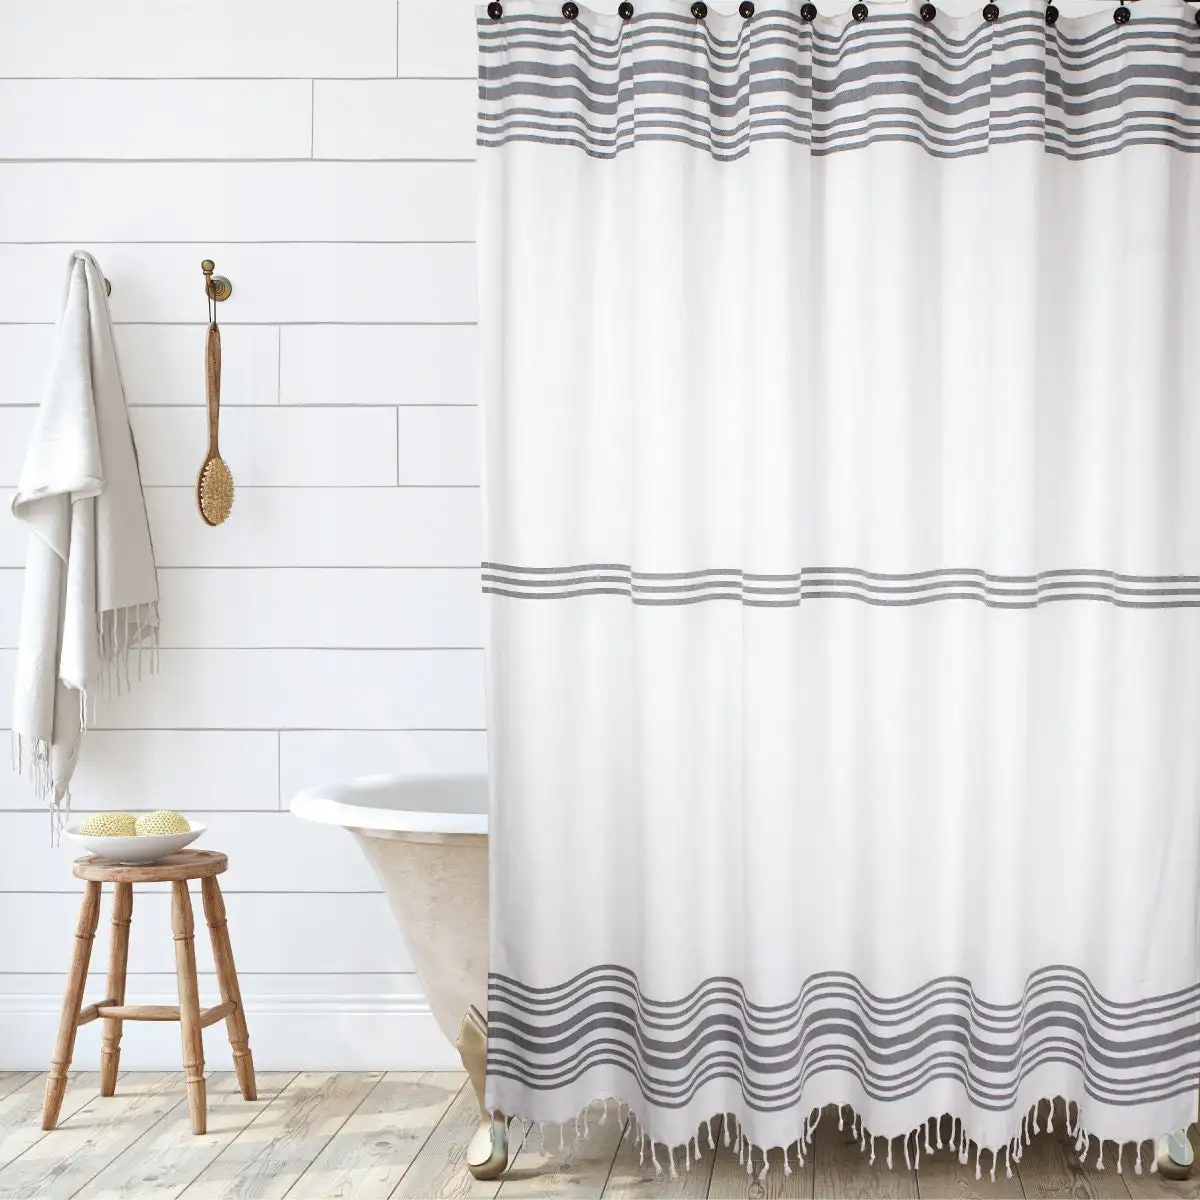 72x72" White Grey Navy Stripes Premium 100% Natural Woven Cotton Shower Curtain for Classic Bathroom